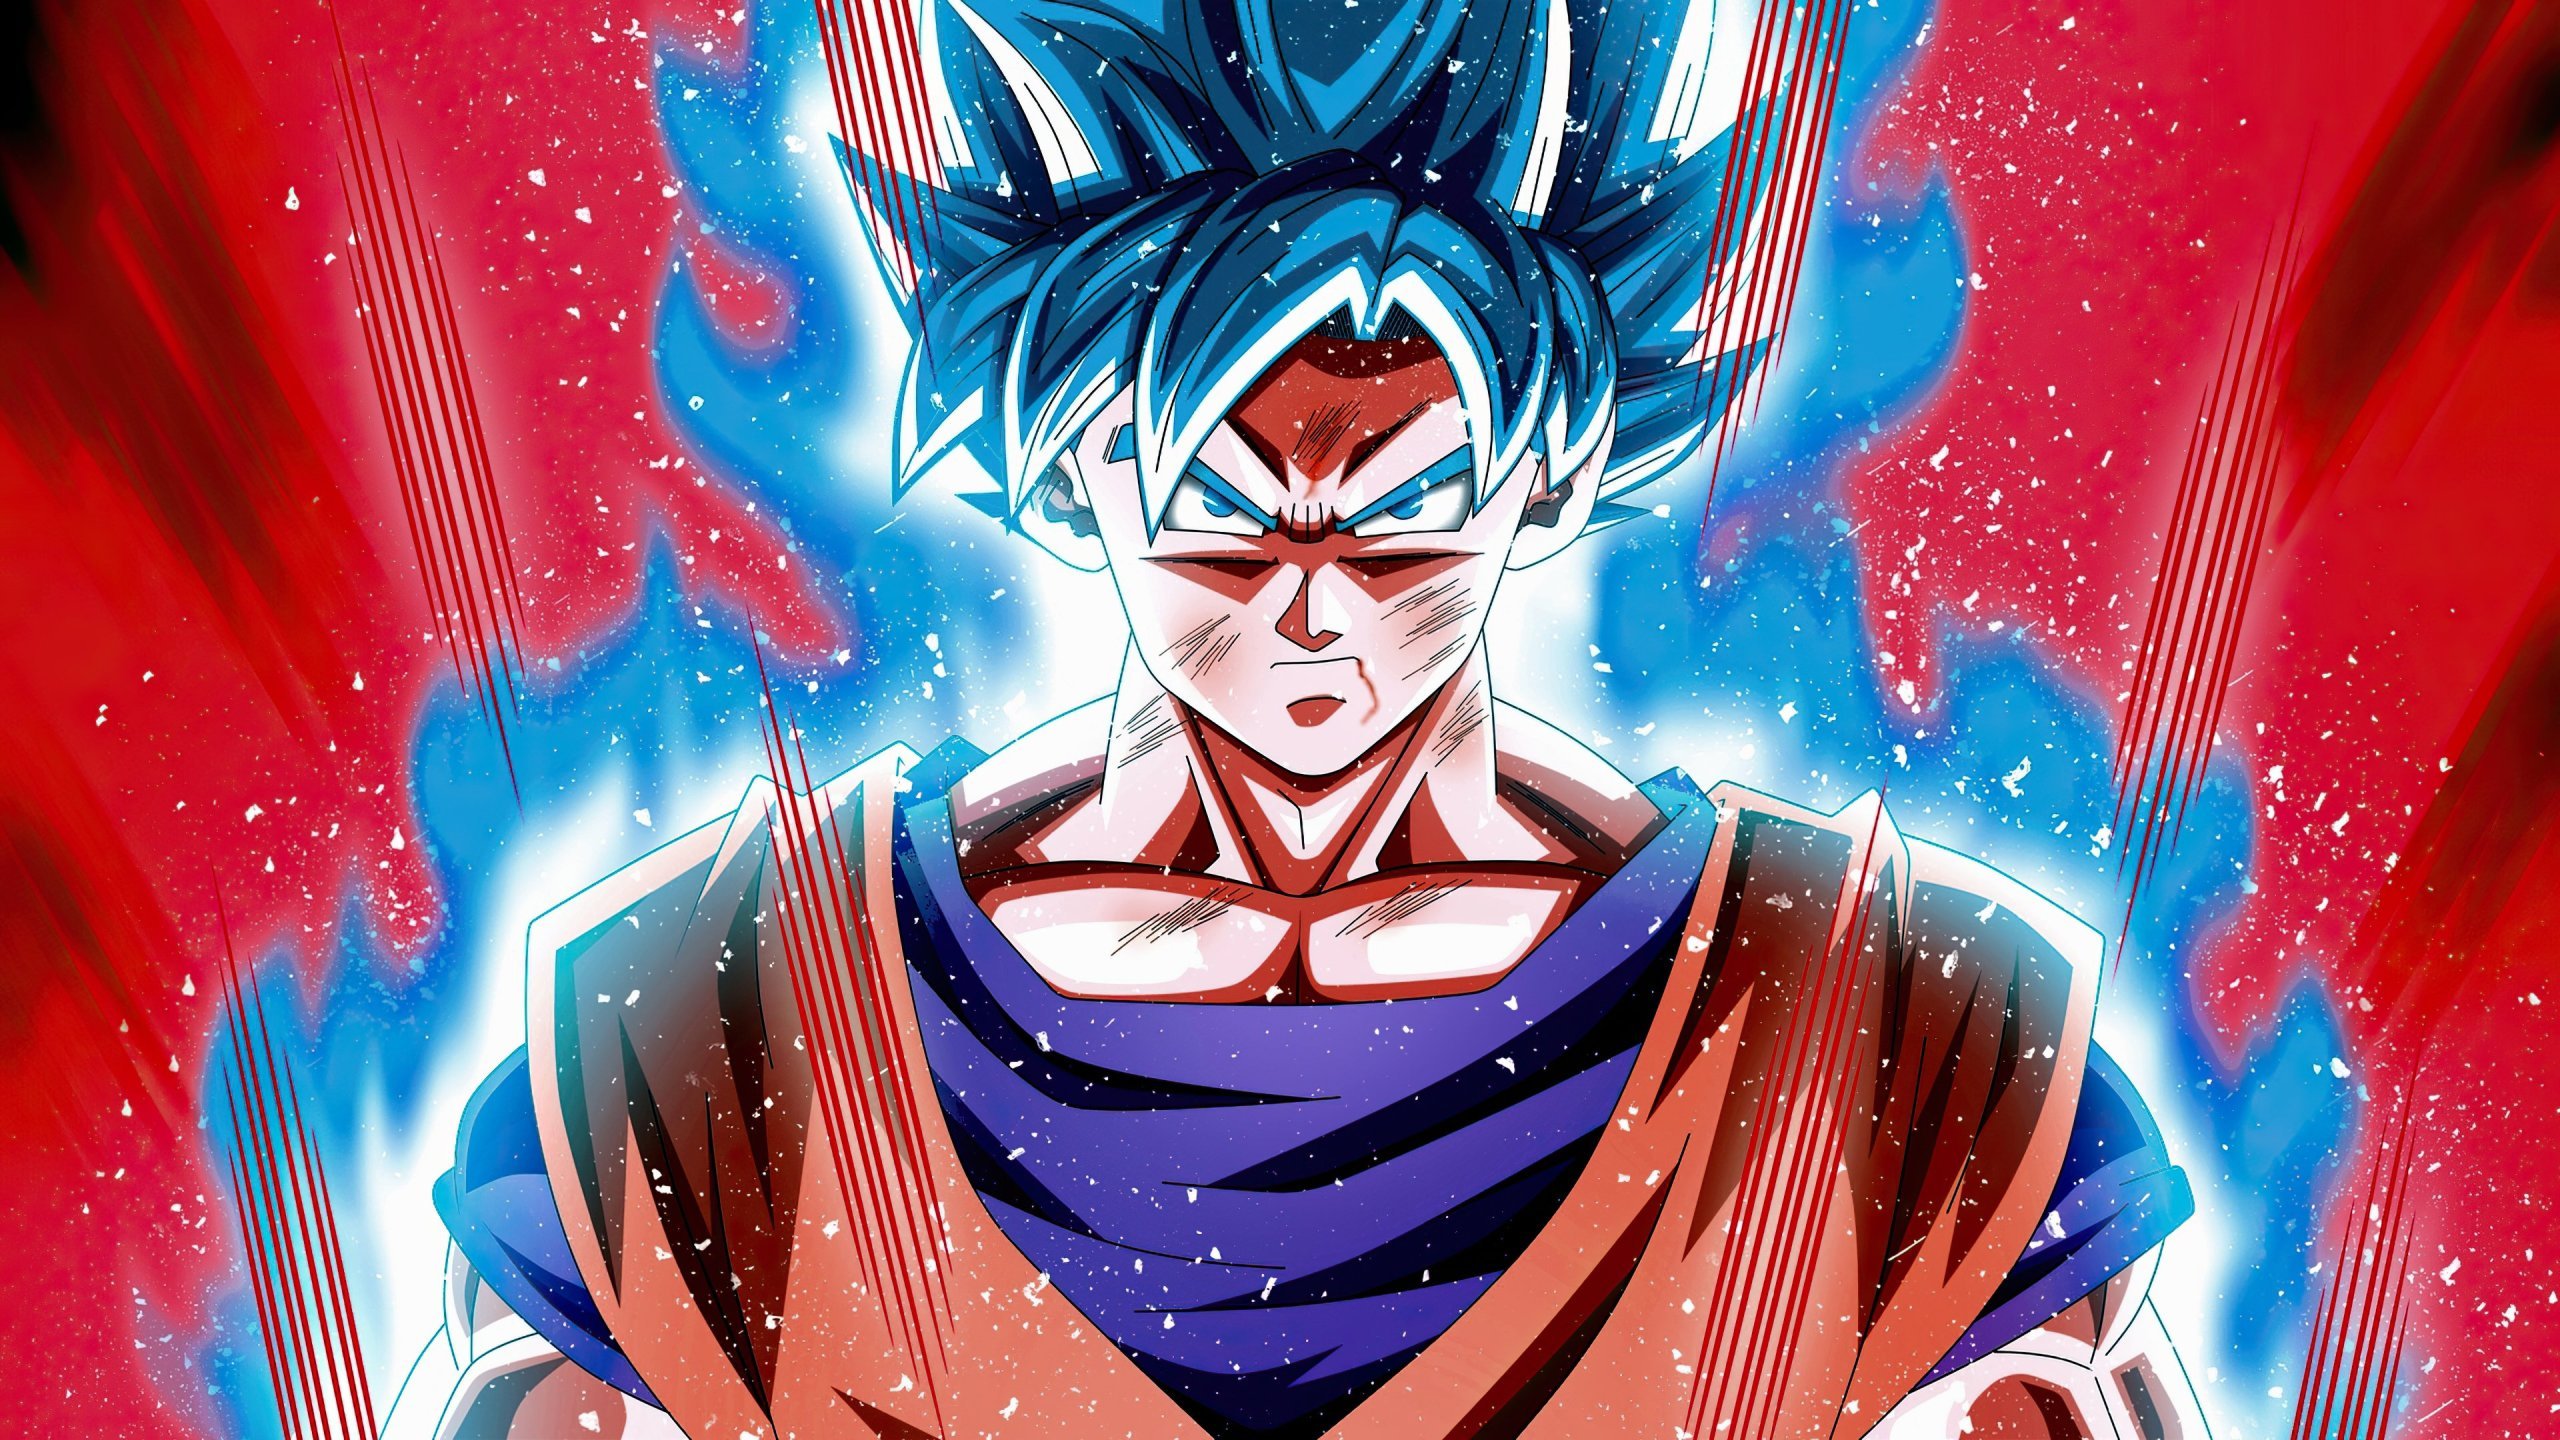 Cool DBZ Wallpapers 64 images